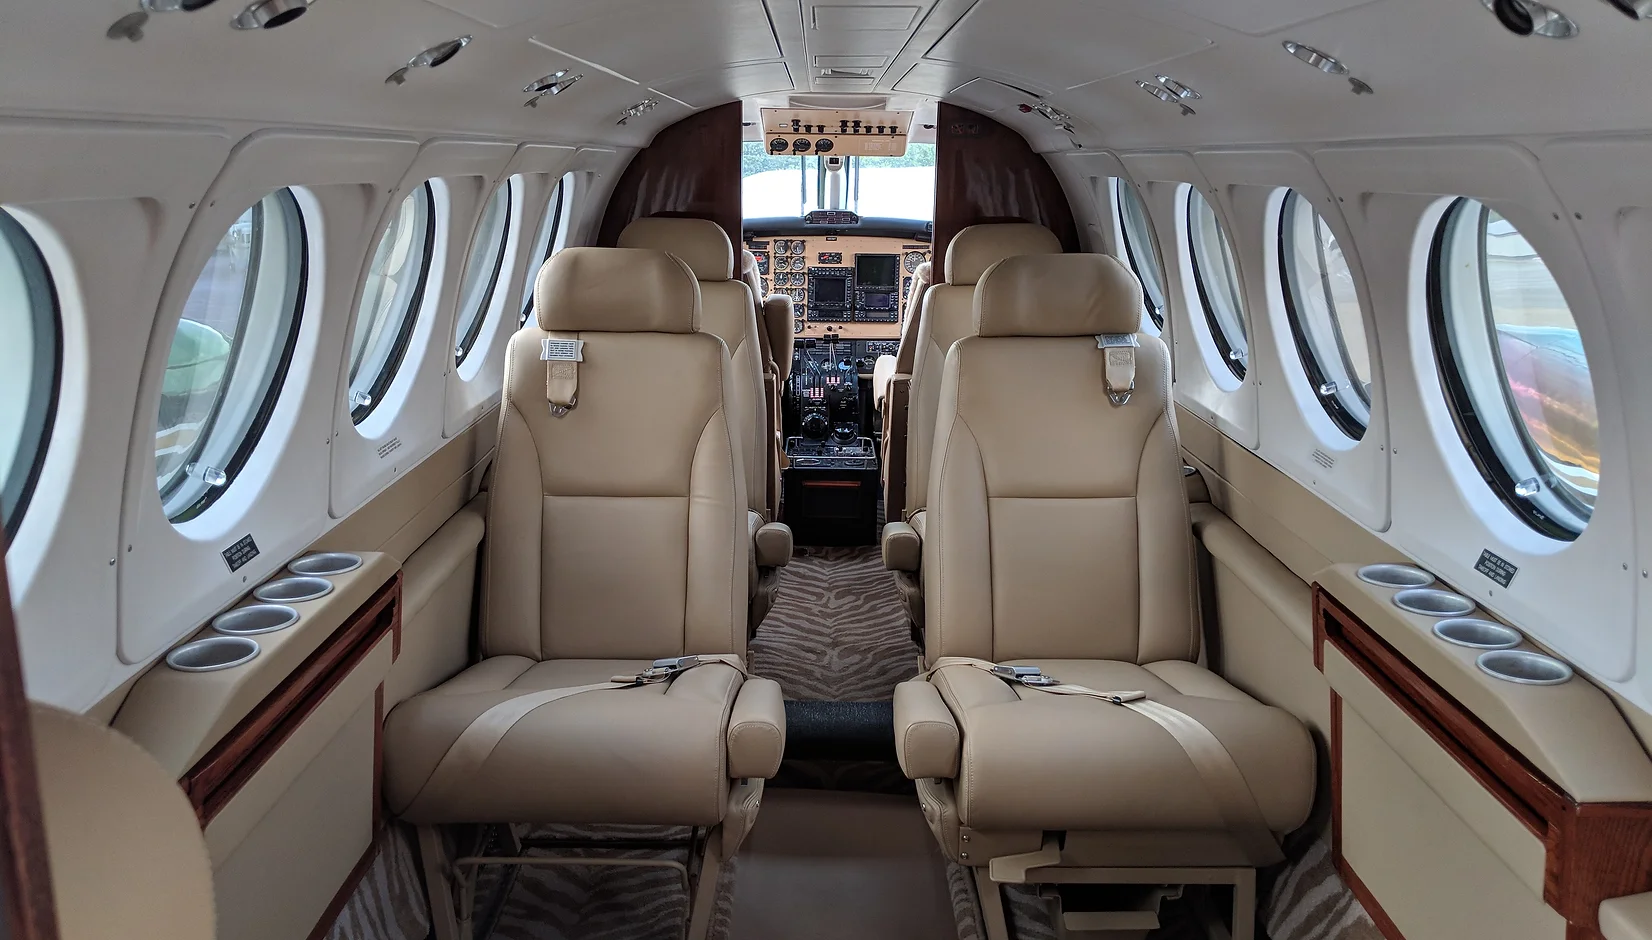 King Air b200 N803MT ​ - Cruise Speed - 325 MPH - Range - 1,200 miles - Seating Capacity - 2 pilots / 7 passengers Equipped with radar and de-ice boots for flight in all weather conditions, a capable platform for quick and easy travel.